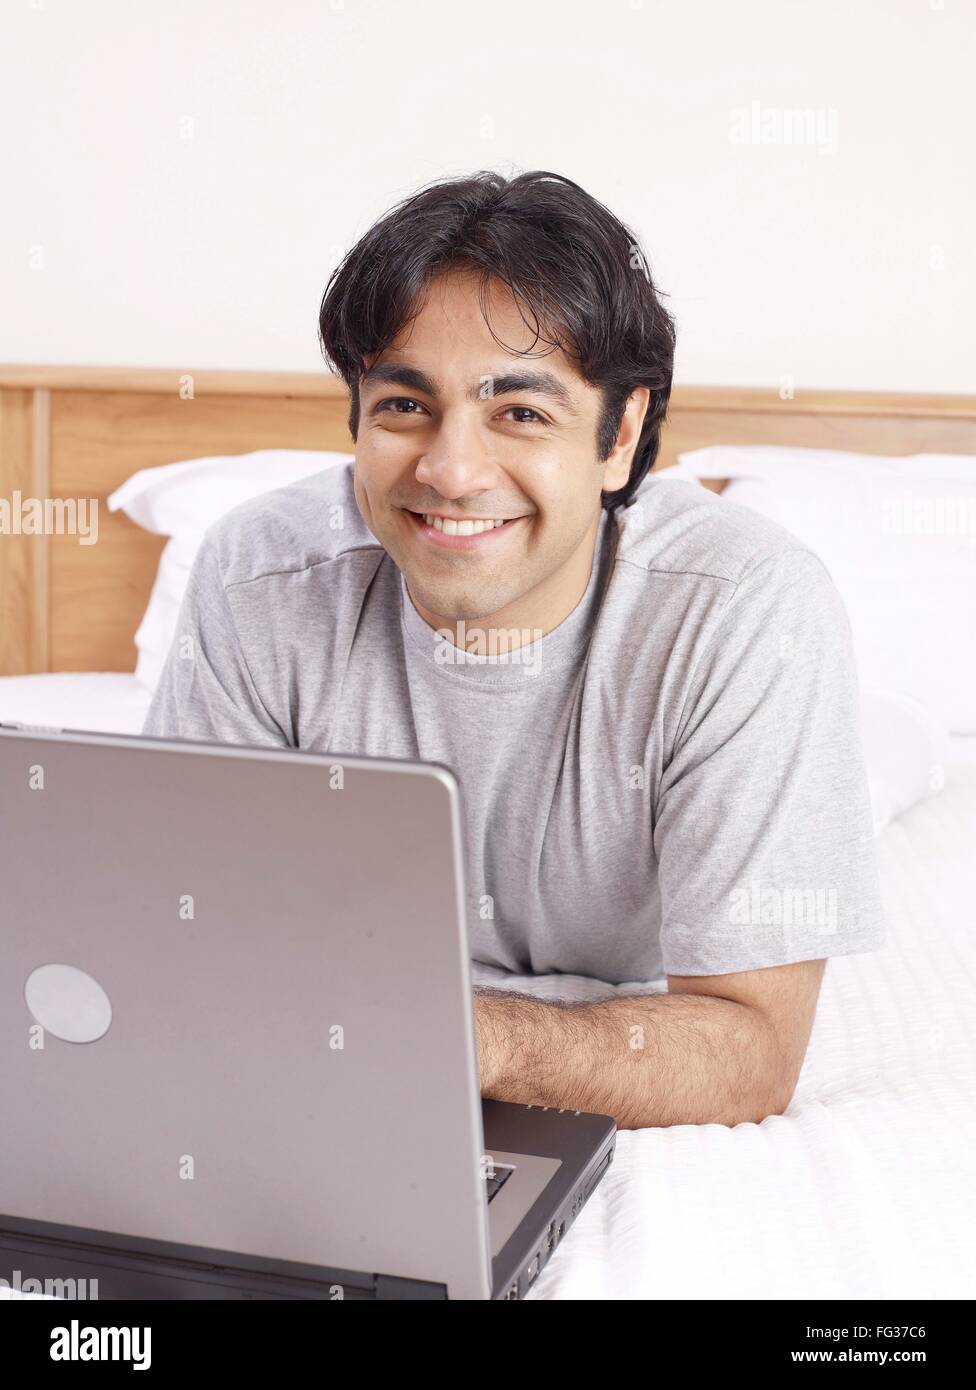 Young man with laptop laying on bed MR#702V Stock Photo